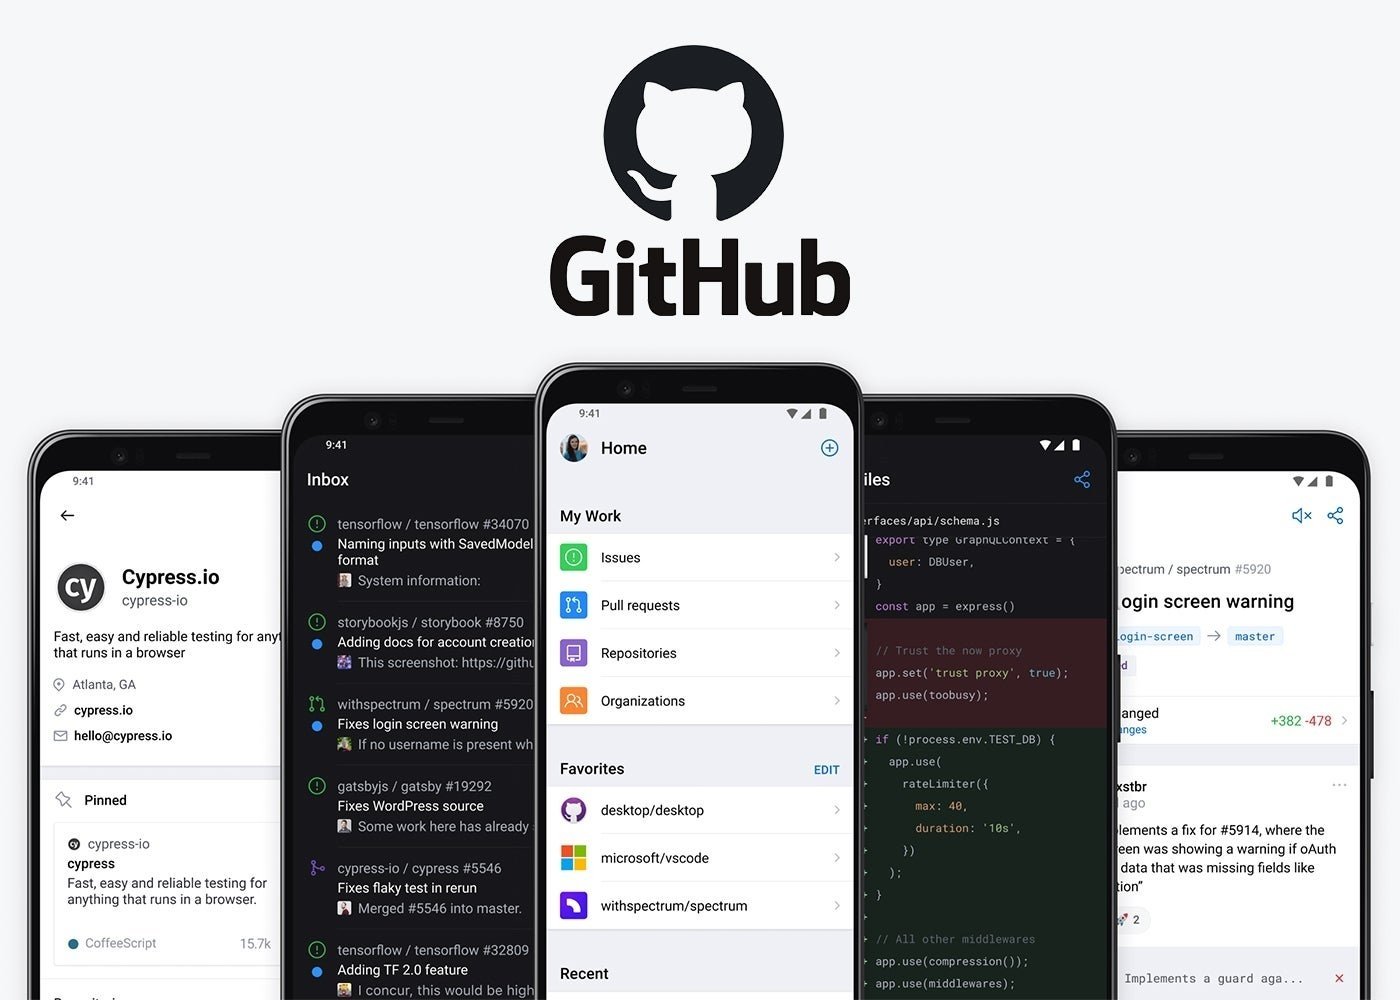 GitHub for Android